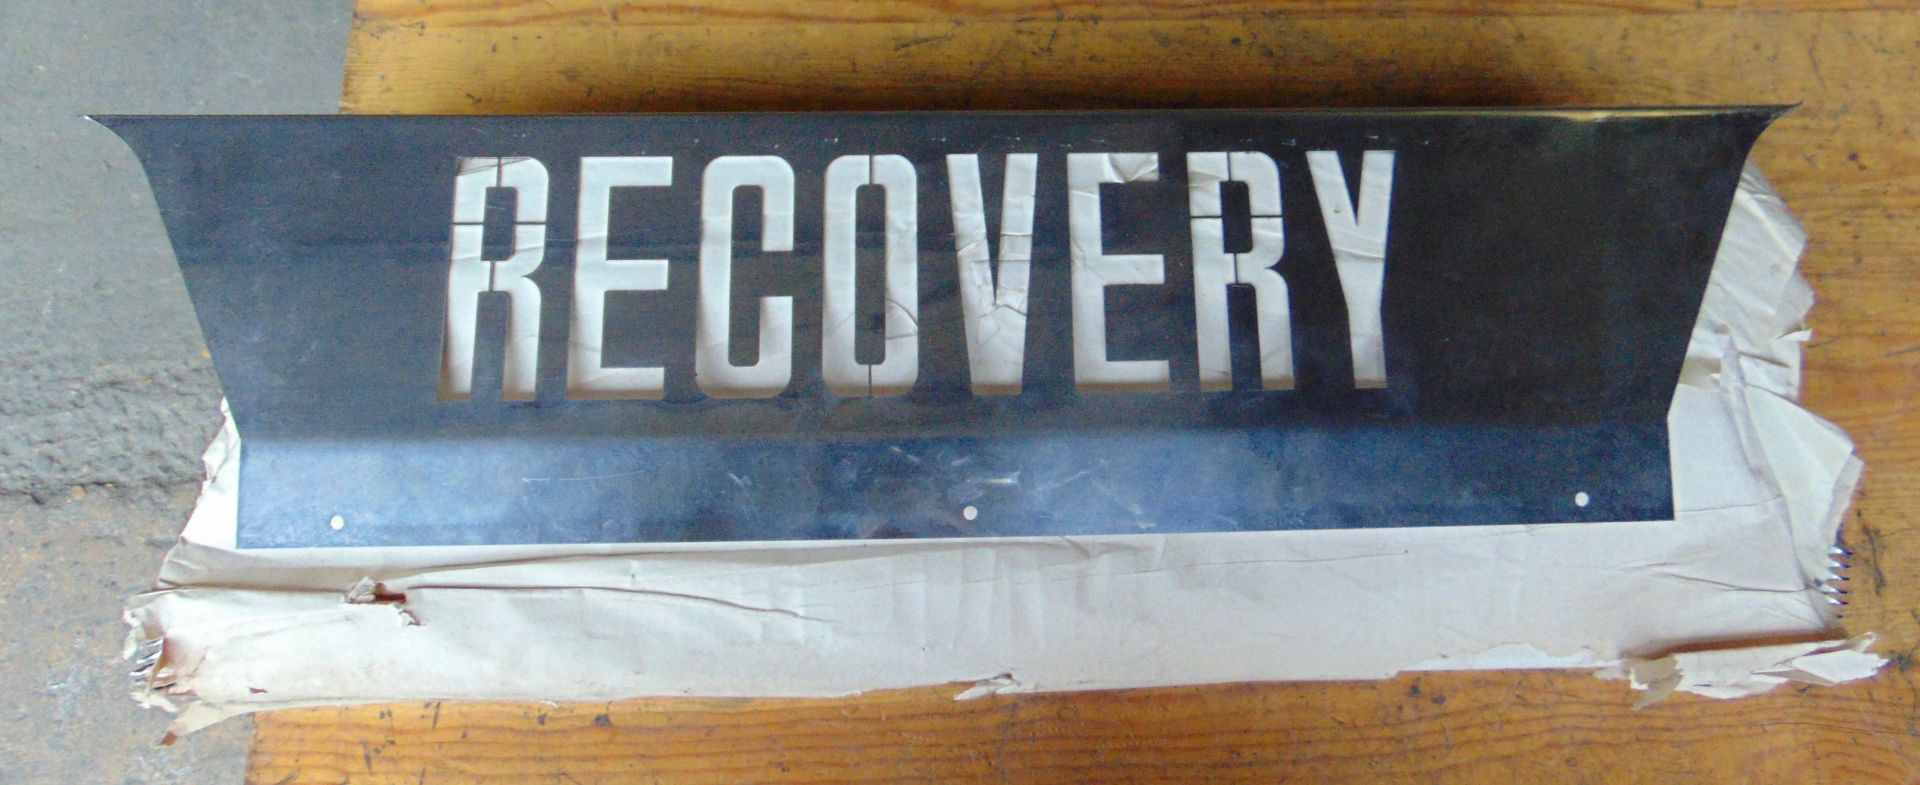 10 x Stainless Steel "RECOVERY" Signs - Image 6 of 6